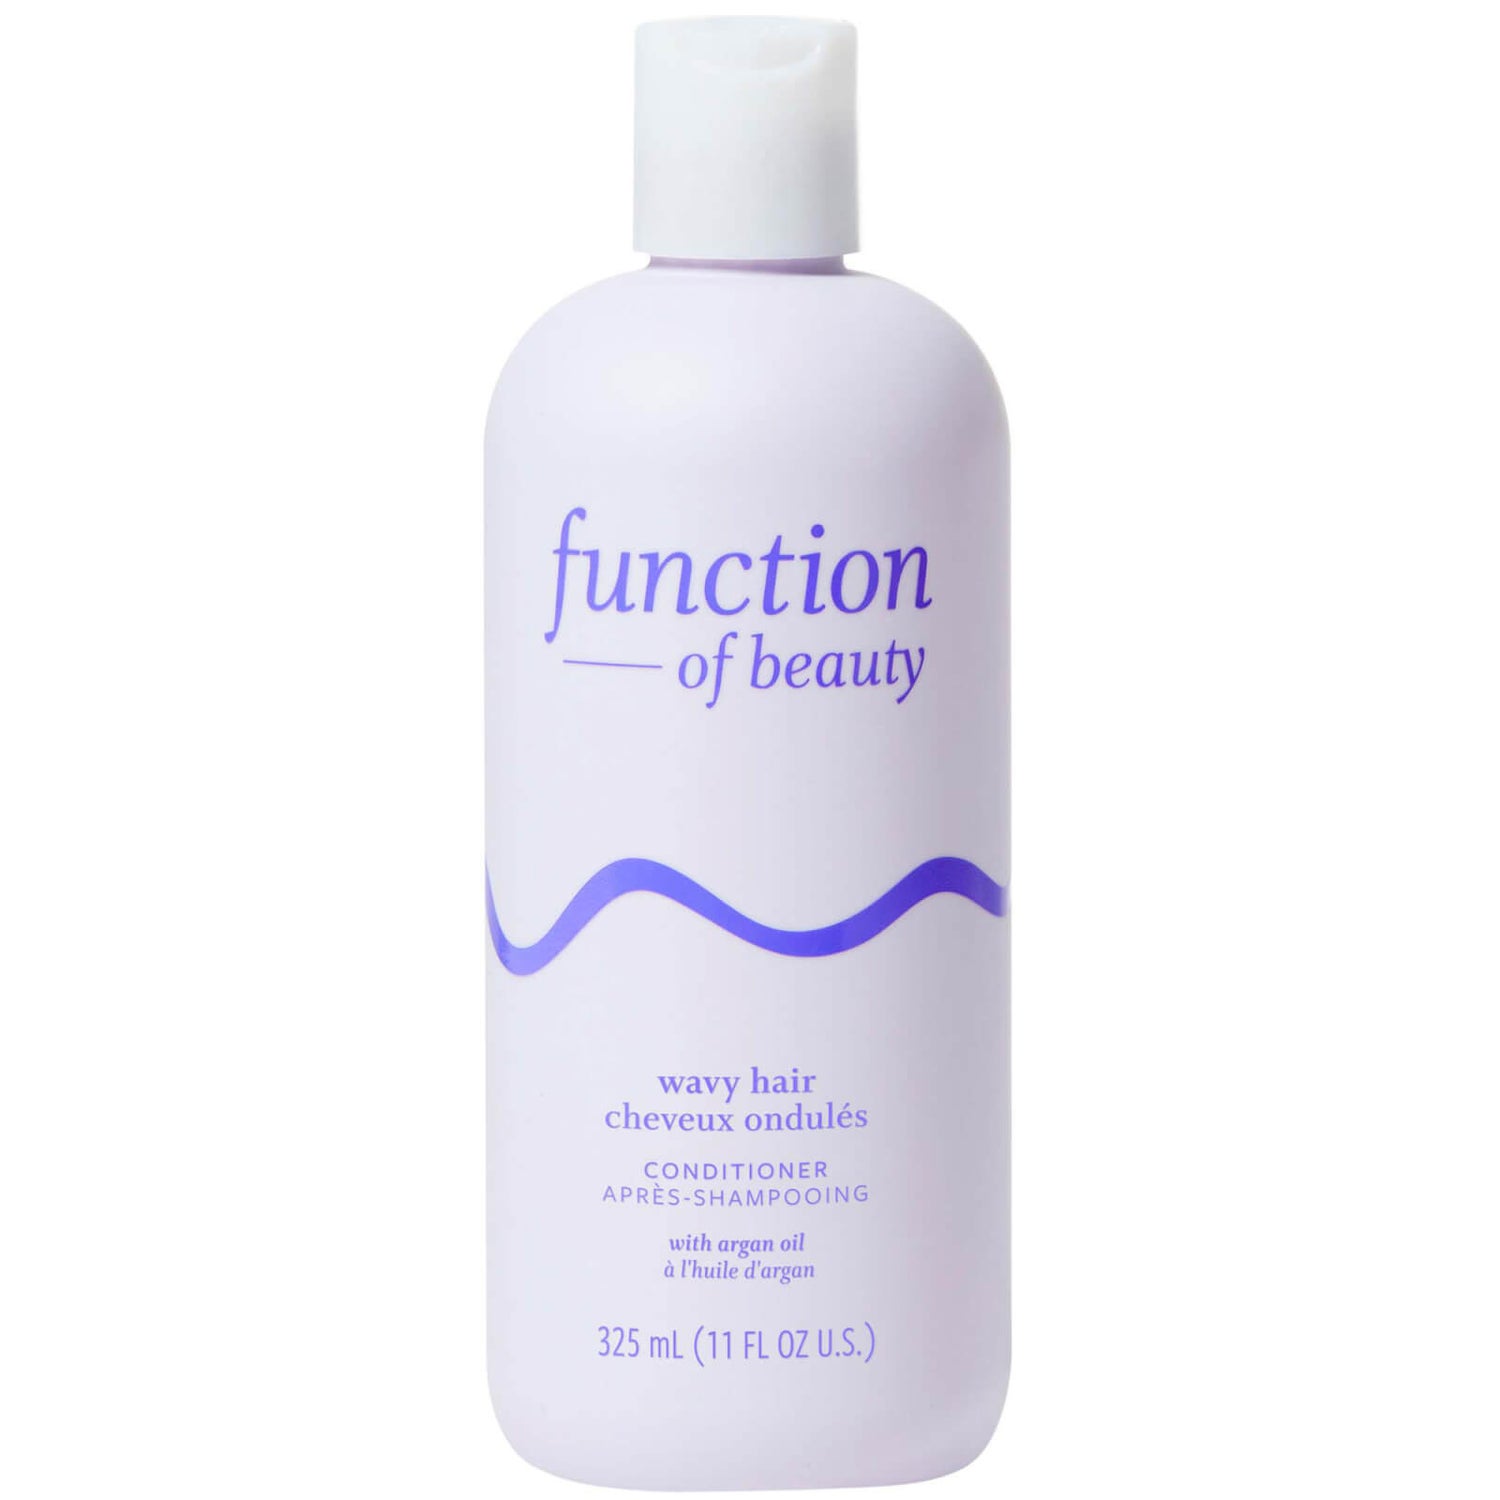 Function of Beauty Wavy Hair Conditioner 325ml